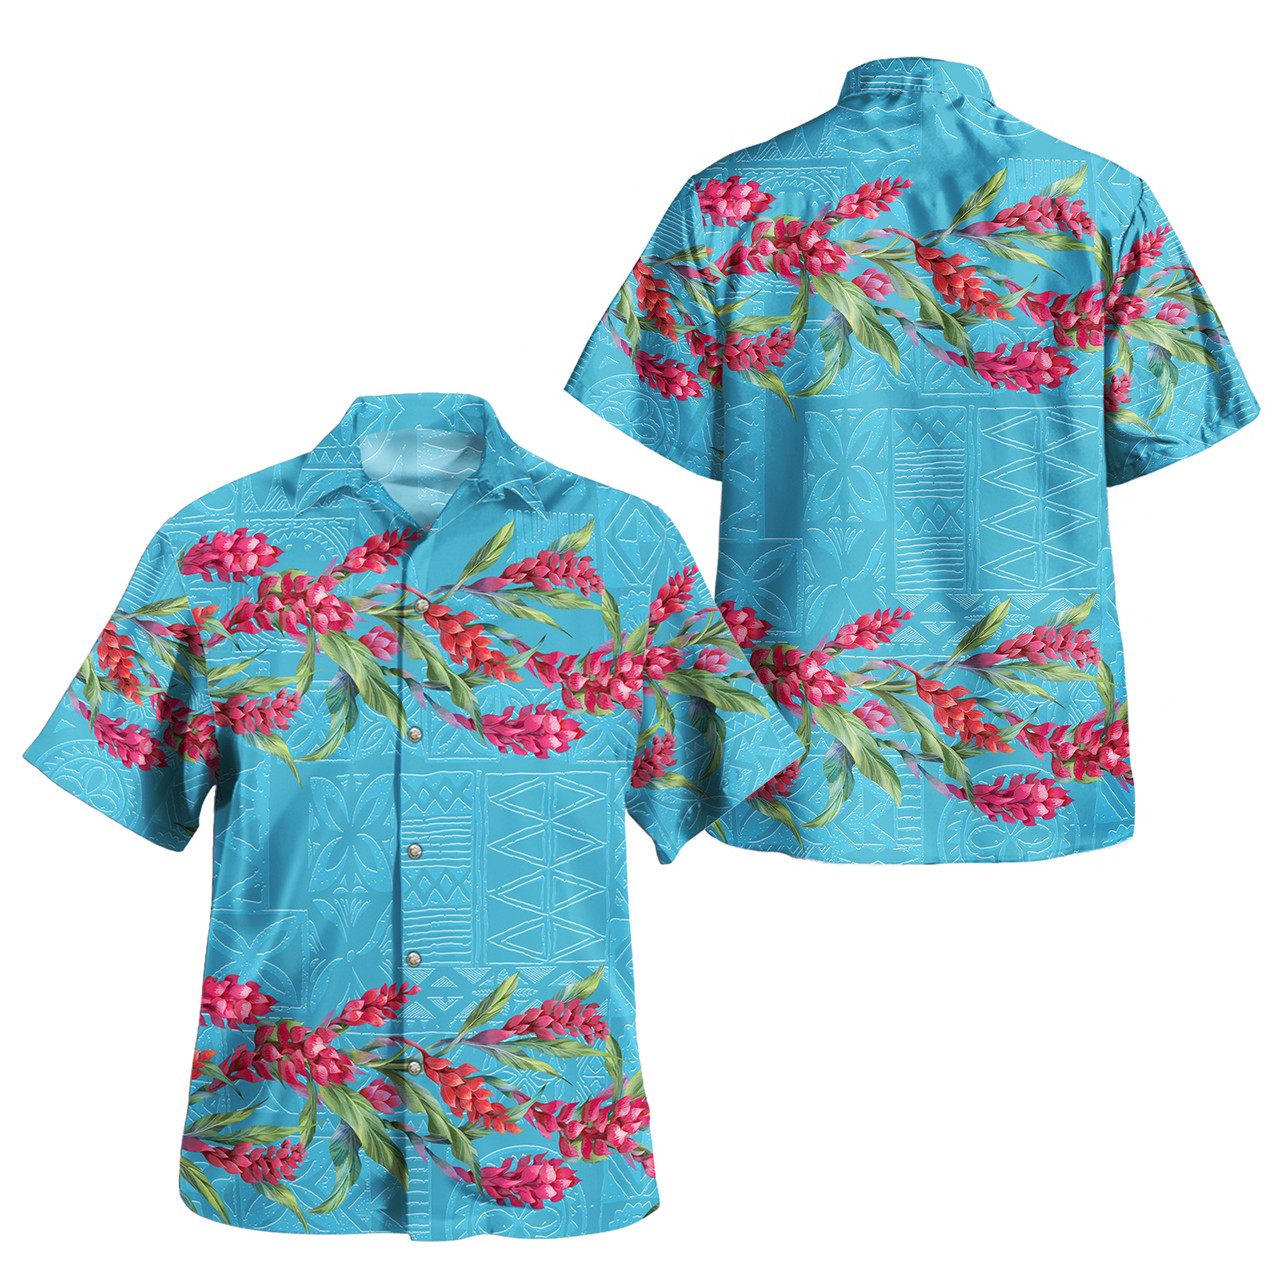 Combo Puletasi And Shirt Ginger Flowers With Polynesian Motif Blue Version